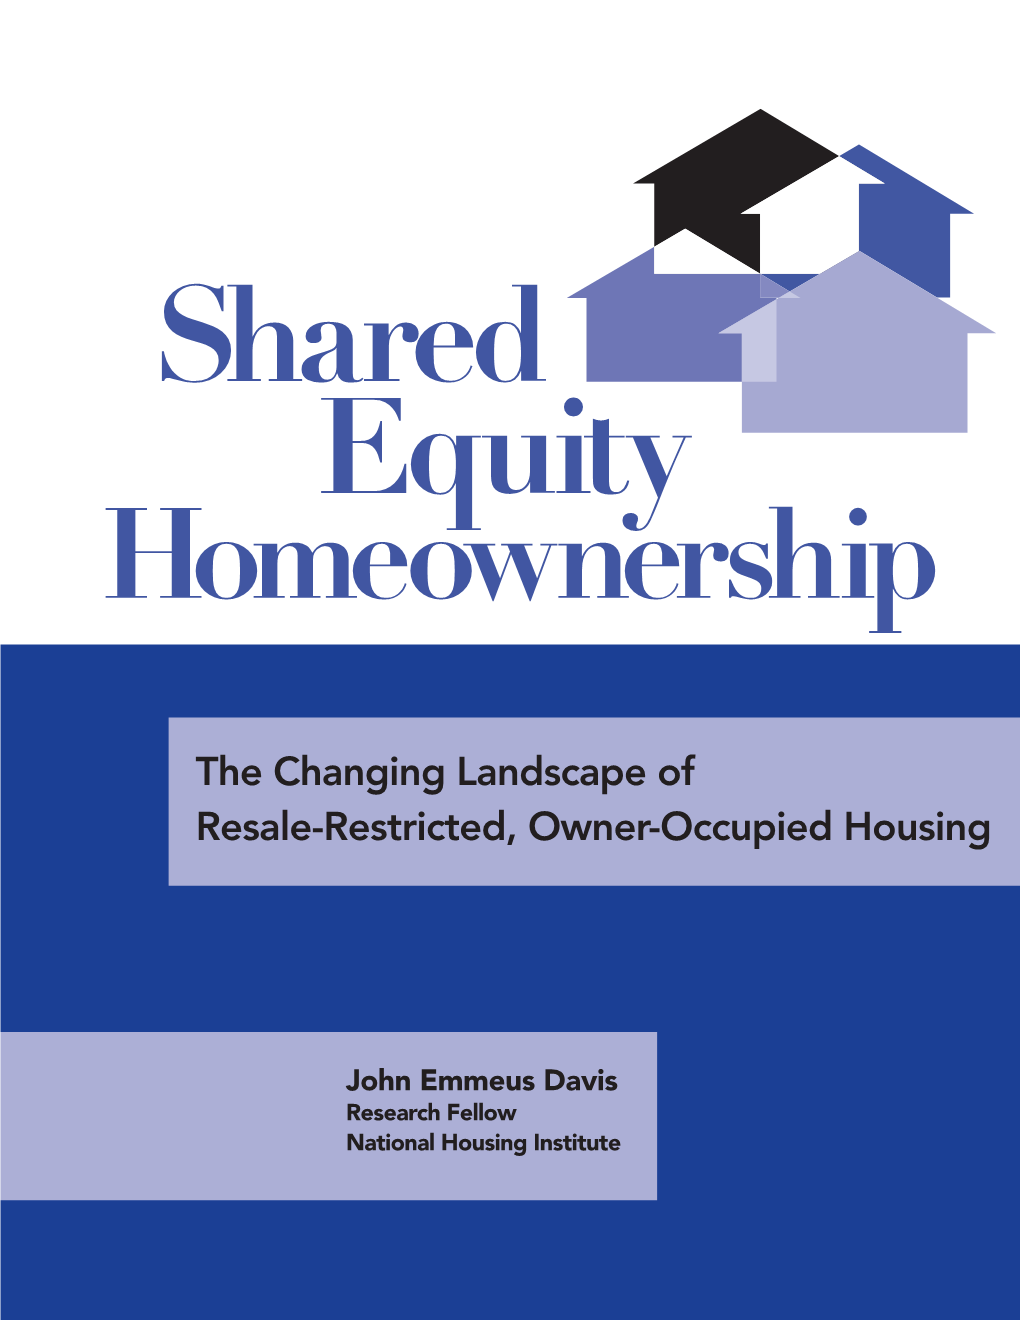 Shared Equity Homeownership Made This Document and Research As Successful As It Is